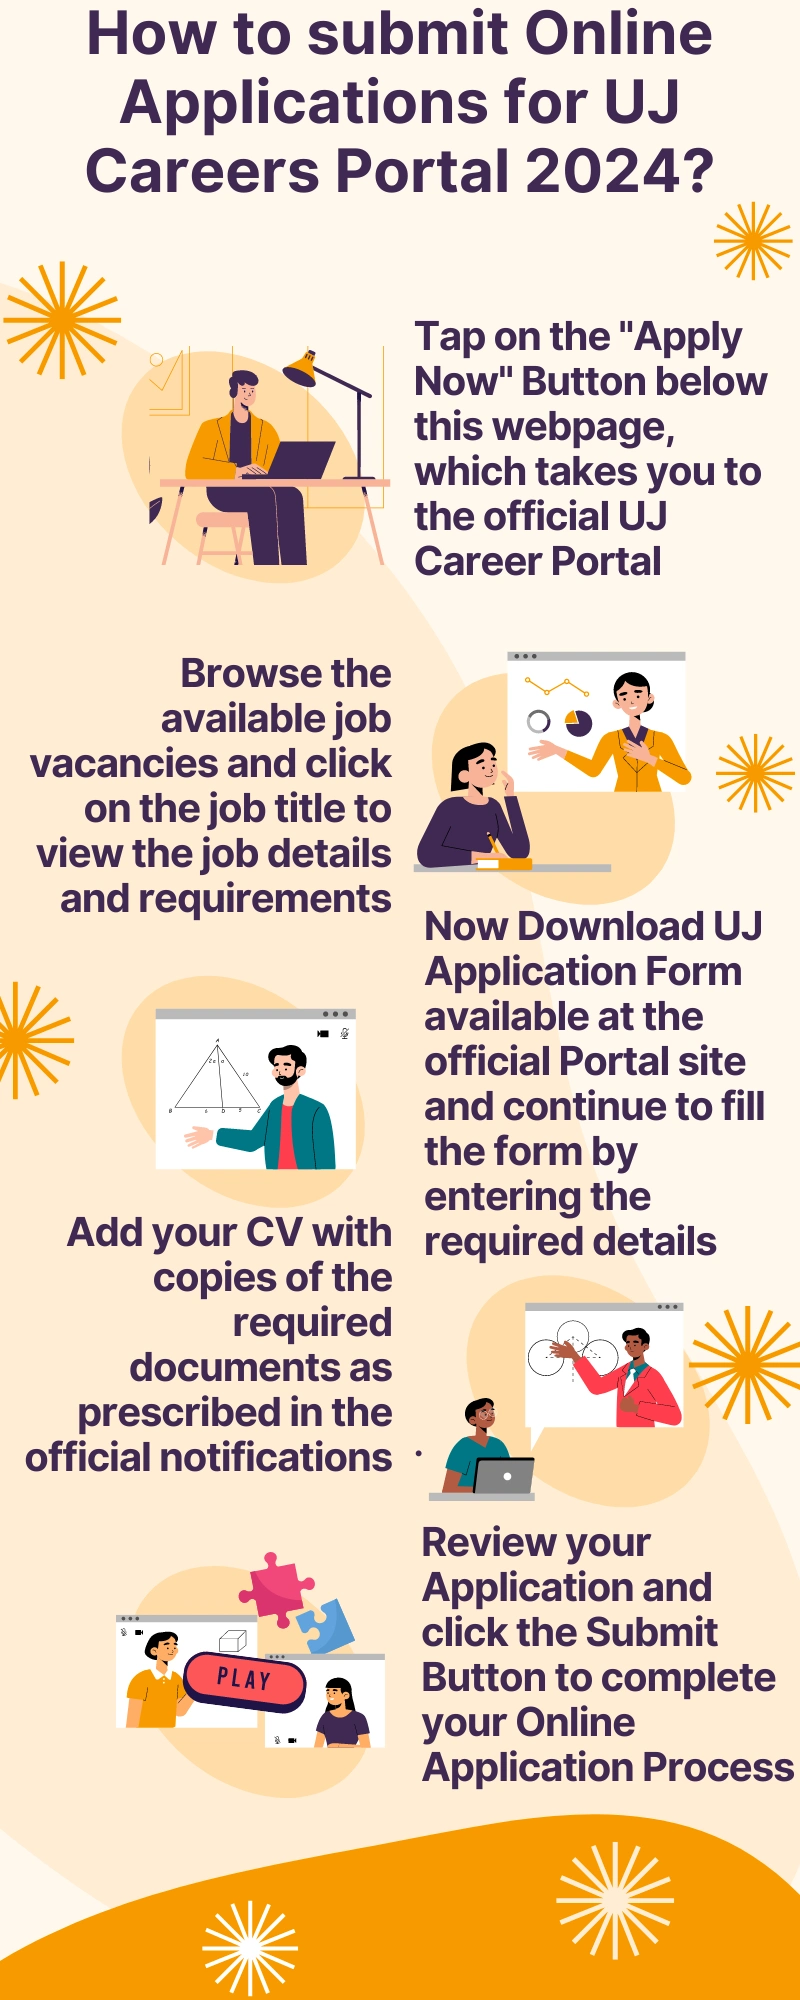 How to submit Online Applications for UJ Careers Portal 2024?